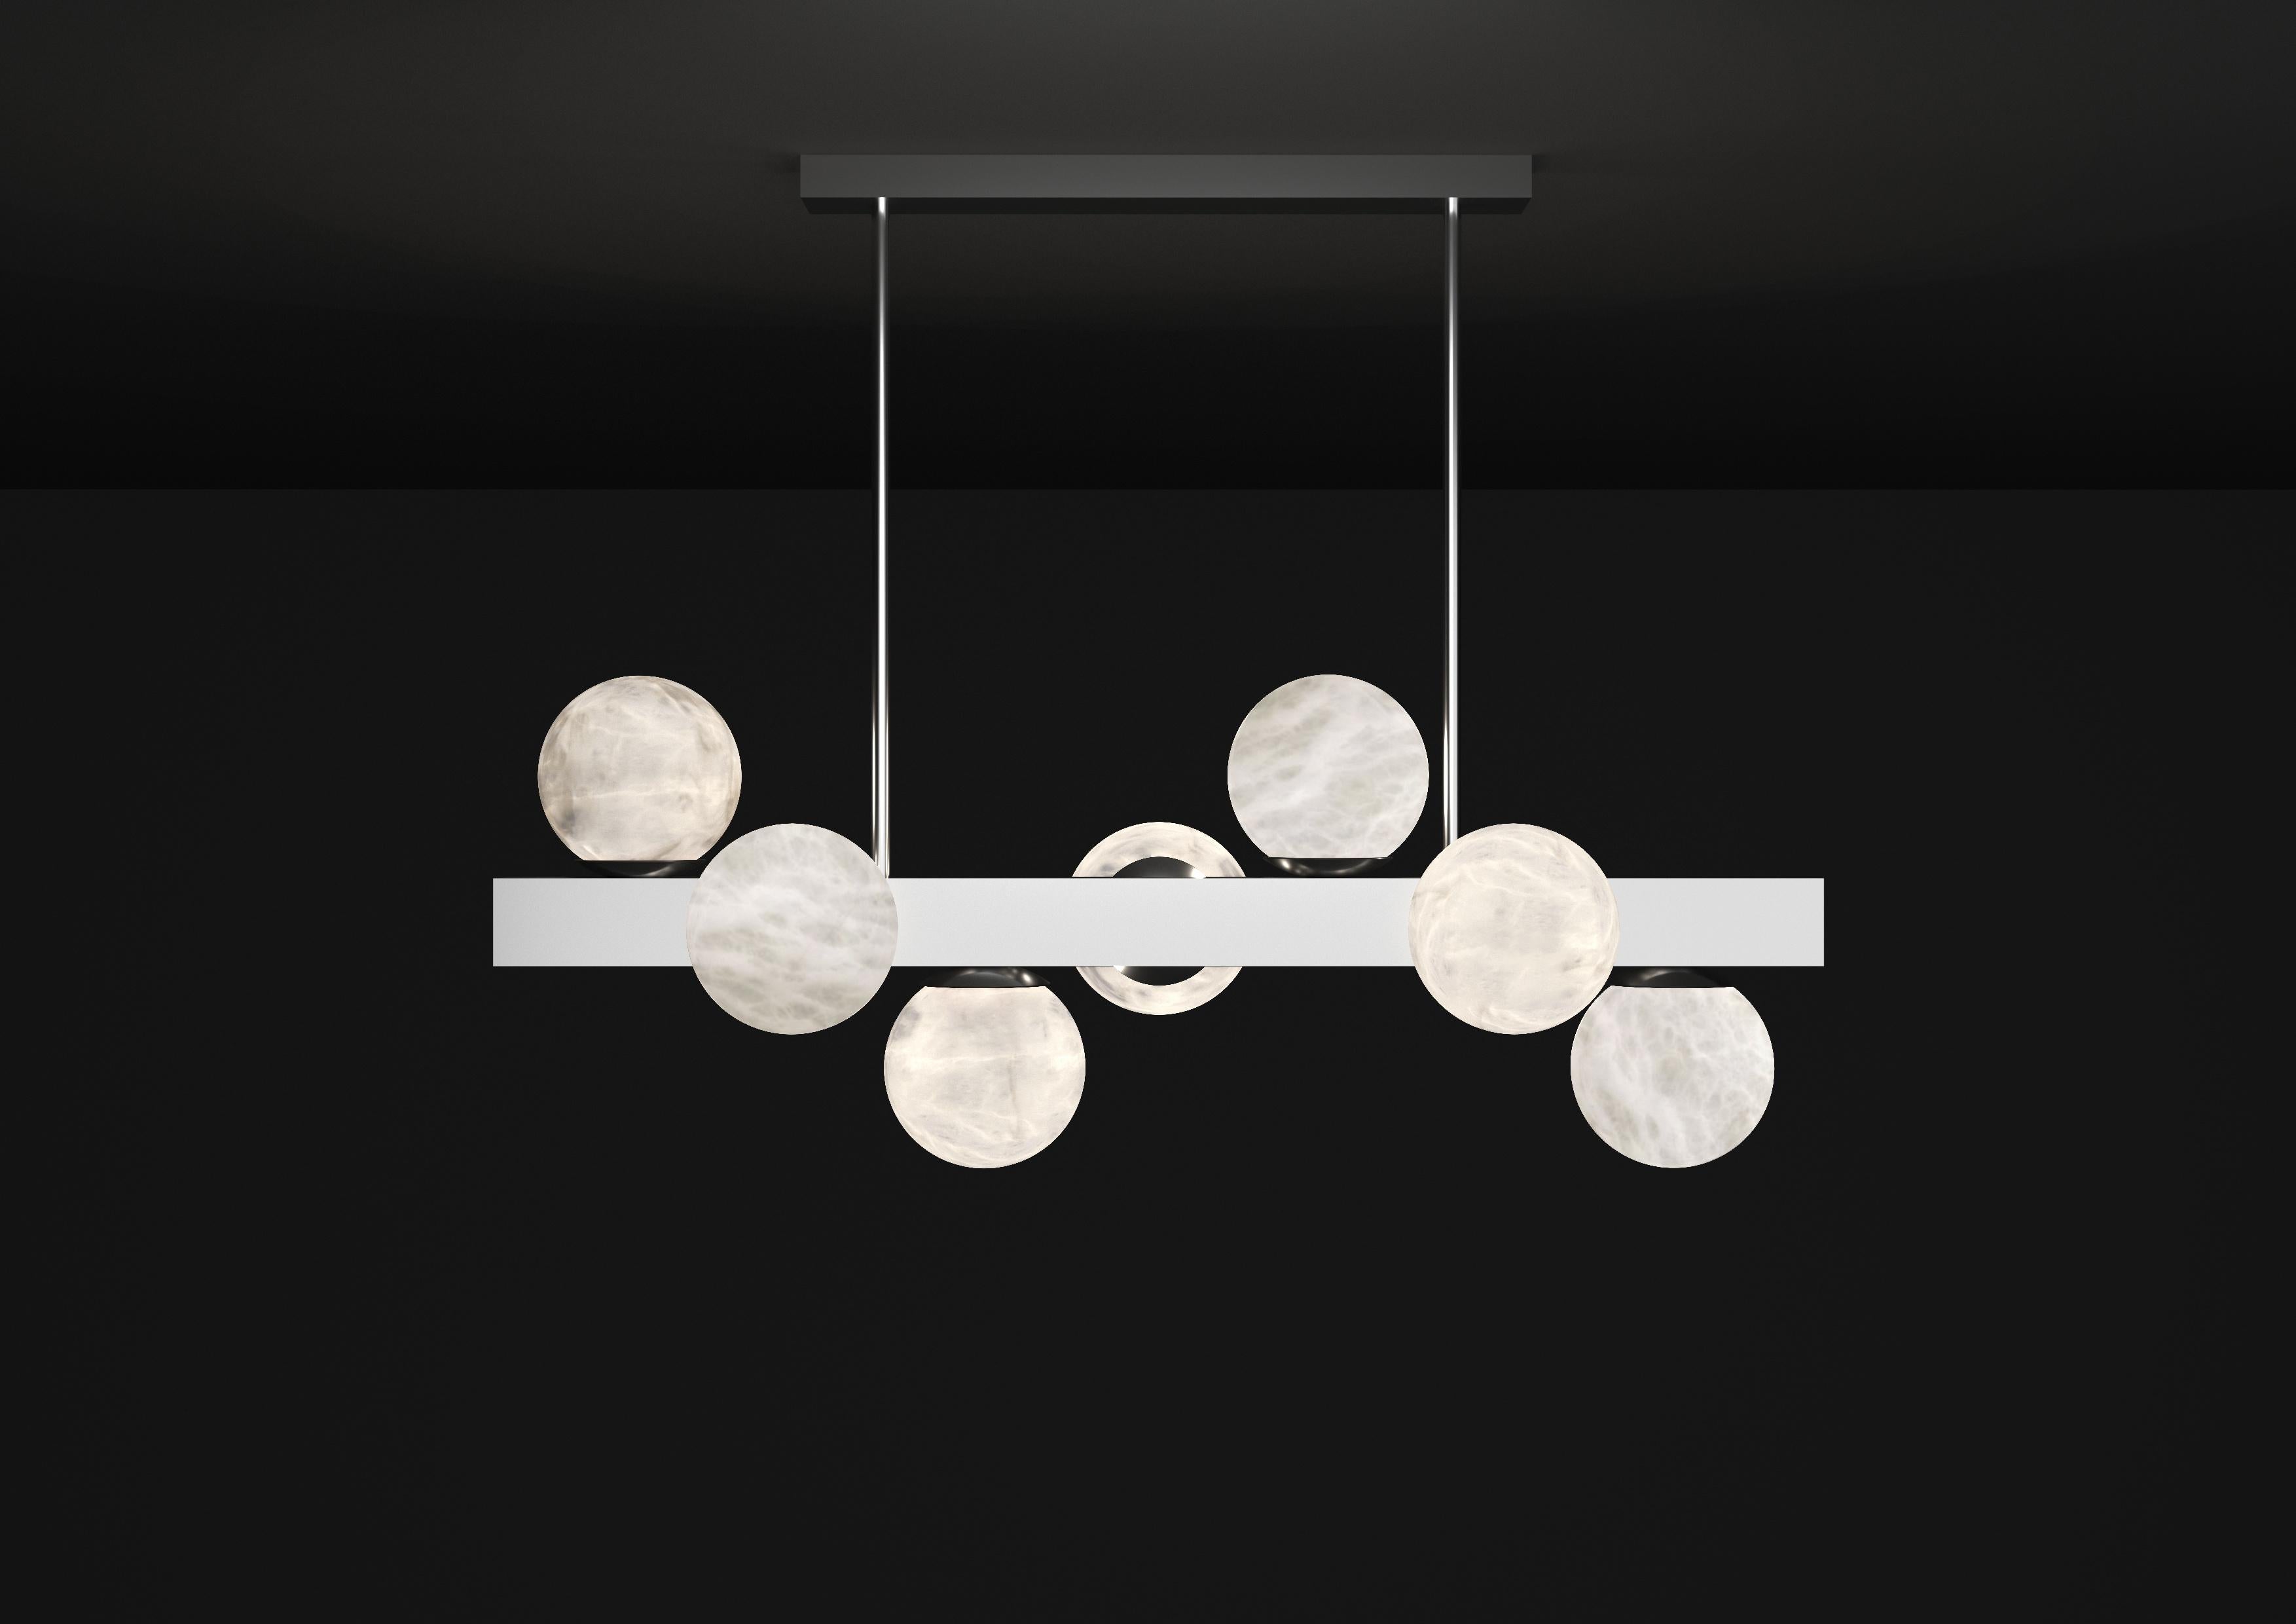 Dioniso Shiny Silver Metal Pendant Lamp by Alabastro Italiano
Dimensions: D 35 x W 91 x H 36 cm.
Materials: White alabaster and metal.

Available in different finishes: Shiny Silver, Bronze, Brushed Brass, Ruggine of Florence, Brushed Burnished,